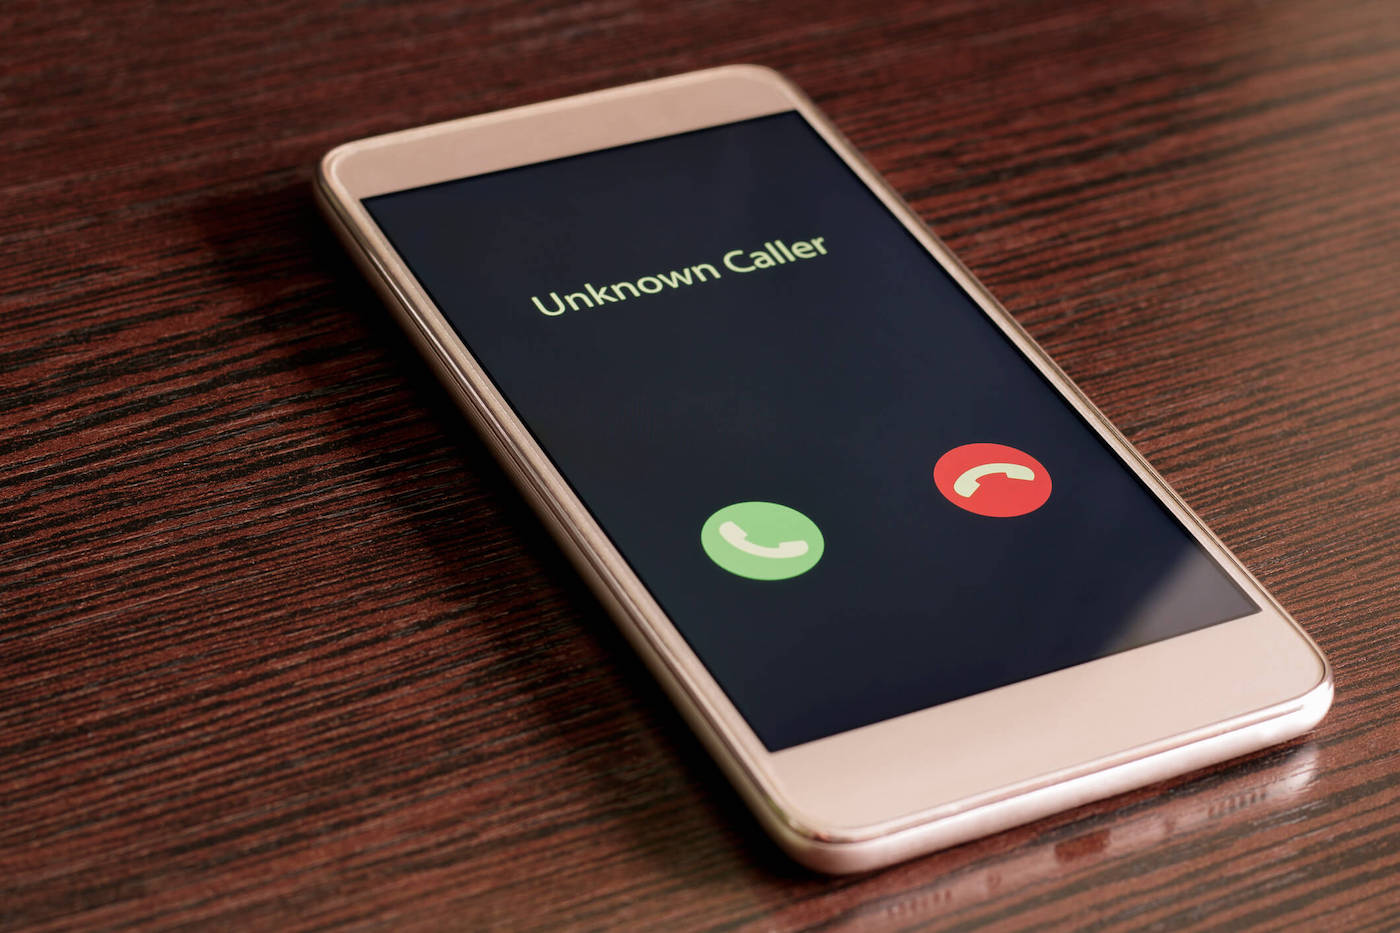 Can I Trust Caller ID? - Experian